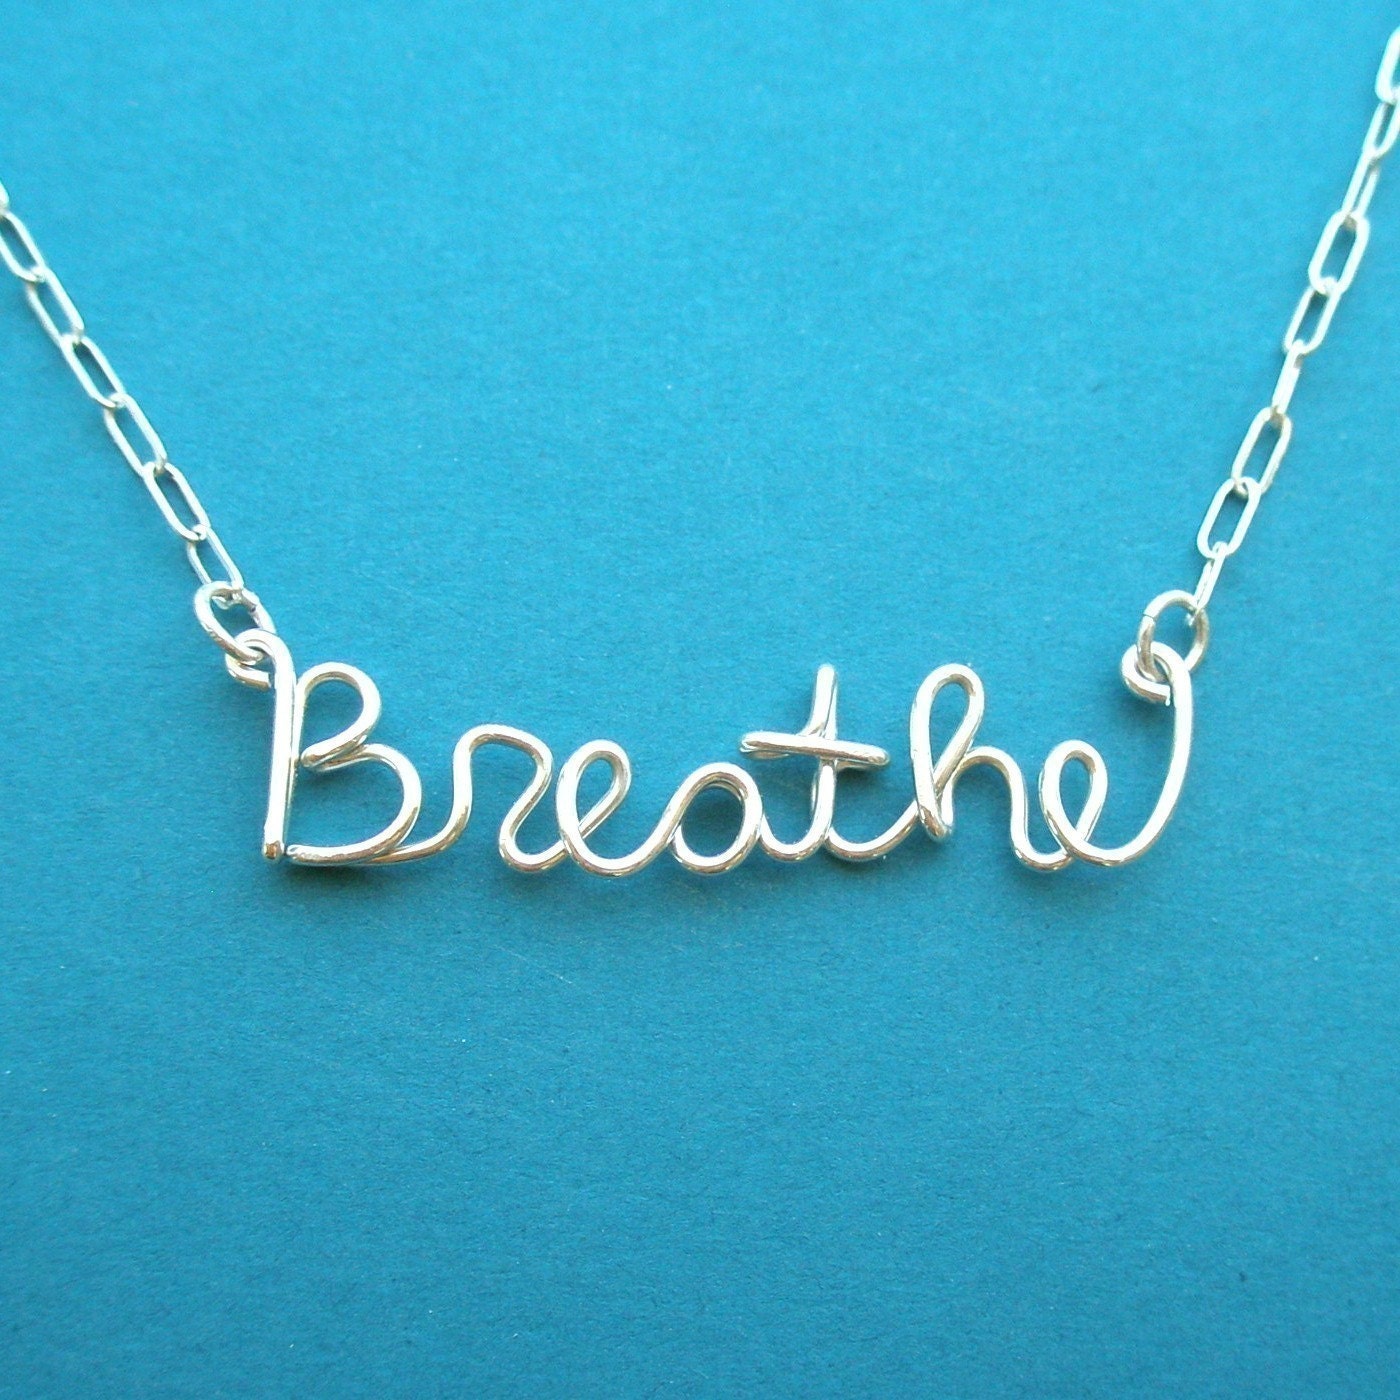 Breathe Necklace - all sterling silver - Cystic Fibrosis Foundation donation